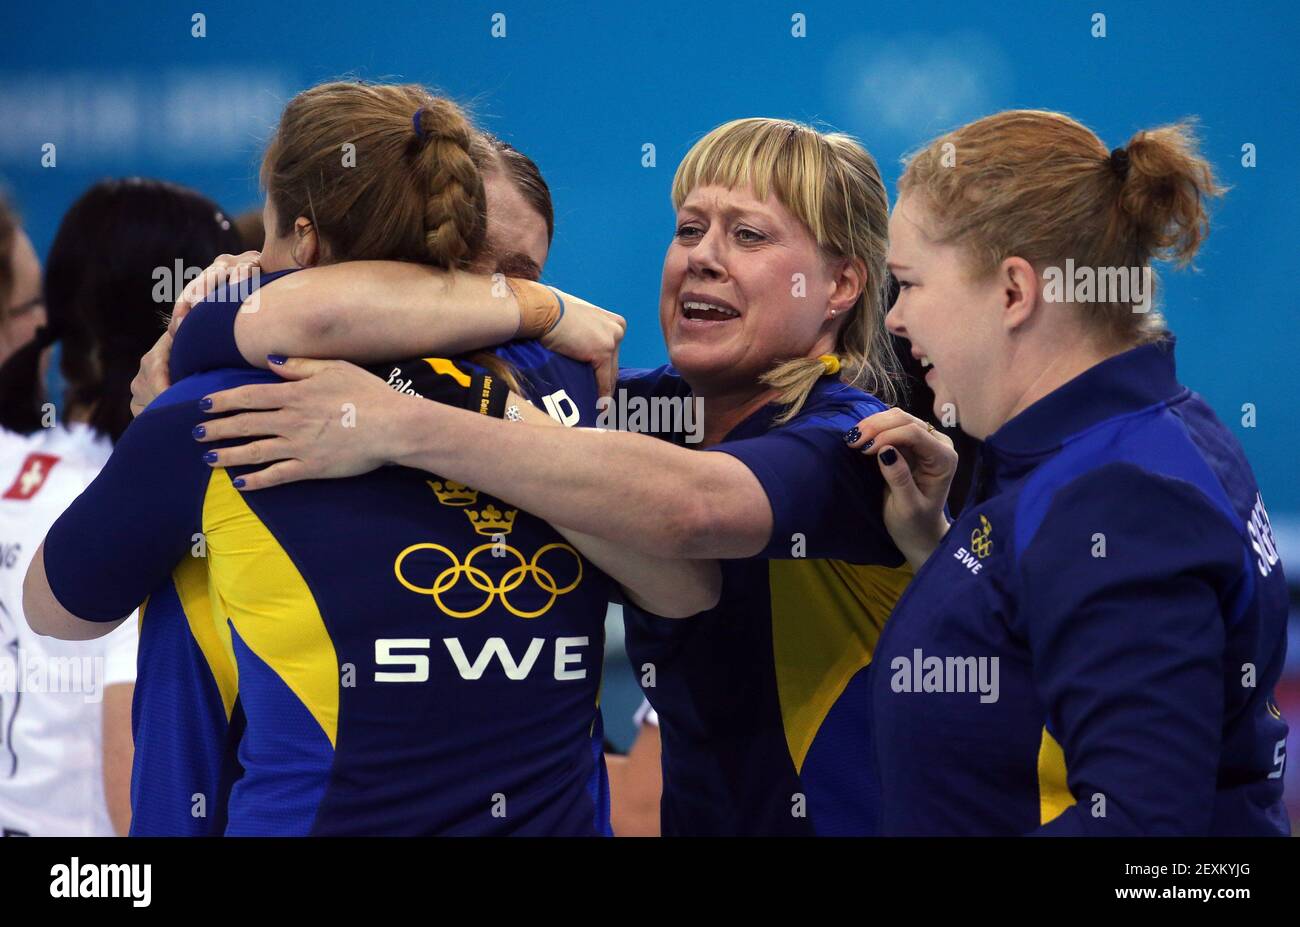 Sweden celebrates their victory over Switzerland during women's curling semifinals at the Ice Cube Curling Center during the Winter Olympics in Sochi, Russia, Wednesday, Feb. 19, 2014. (Photo by Brian Cassella/Chicago Tribune/MCT/Sipa USA) Stock Photo